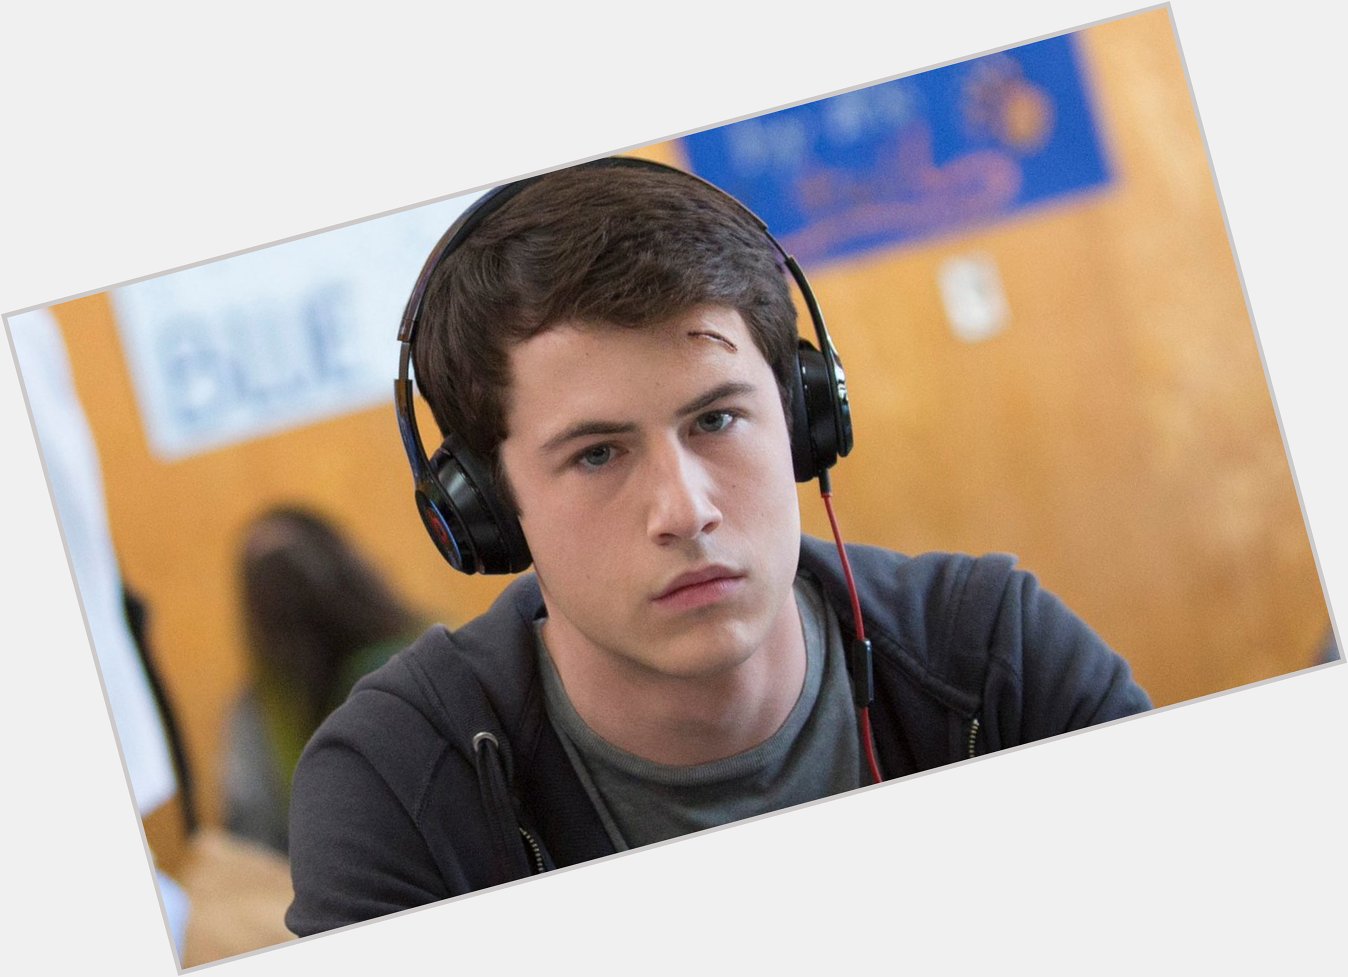 Happy birthday to Dylan Minnette! 